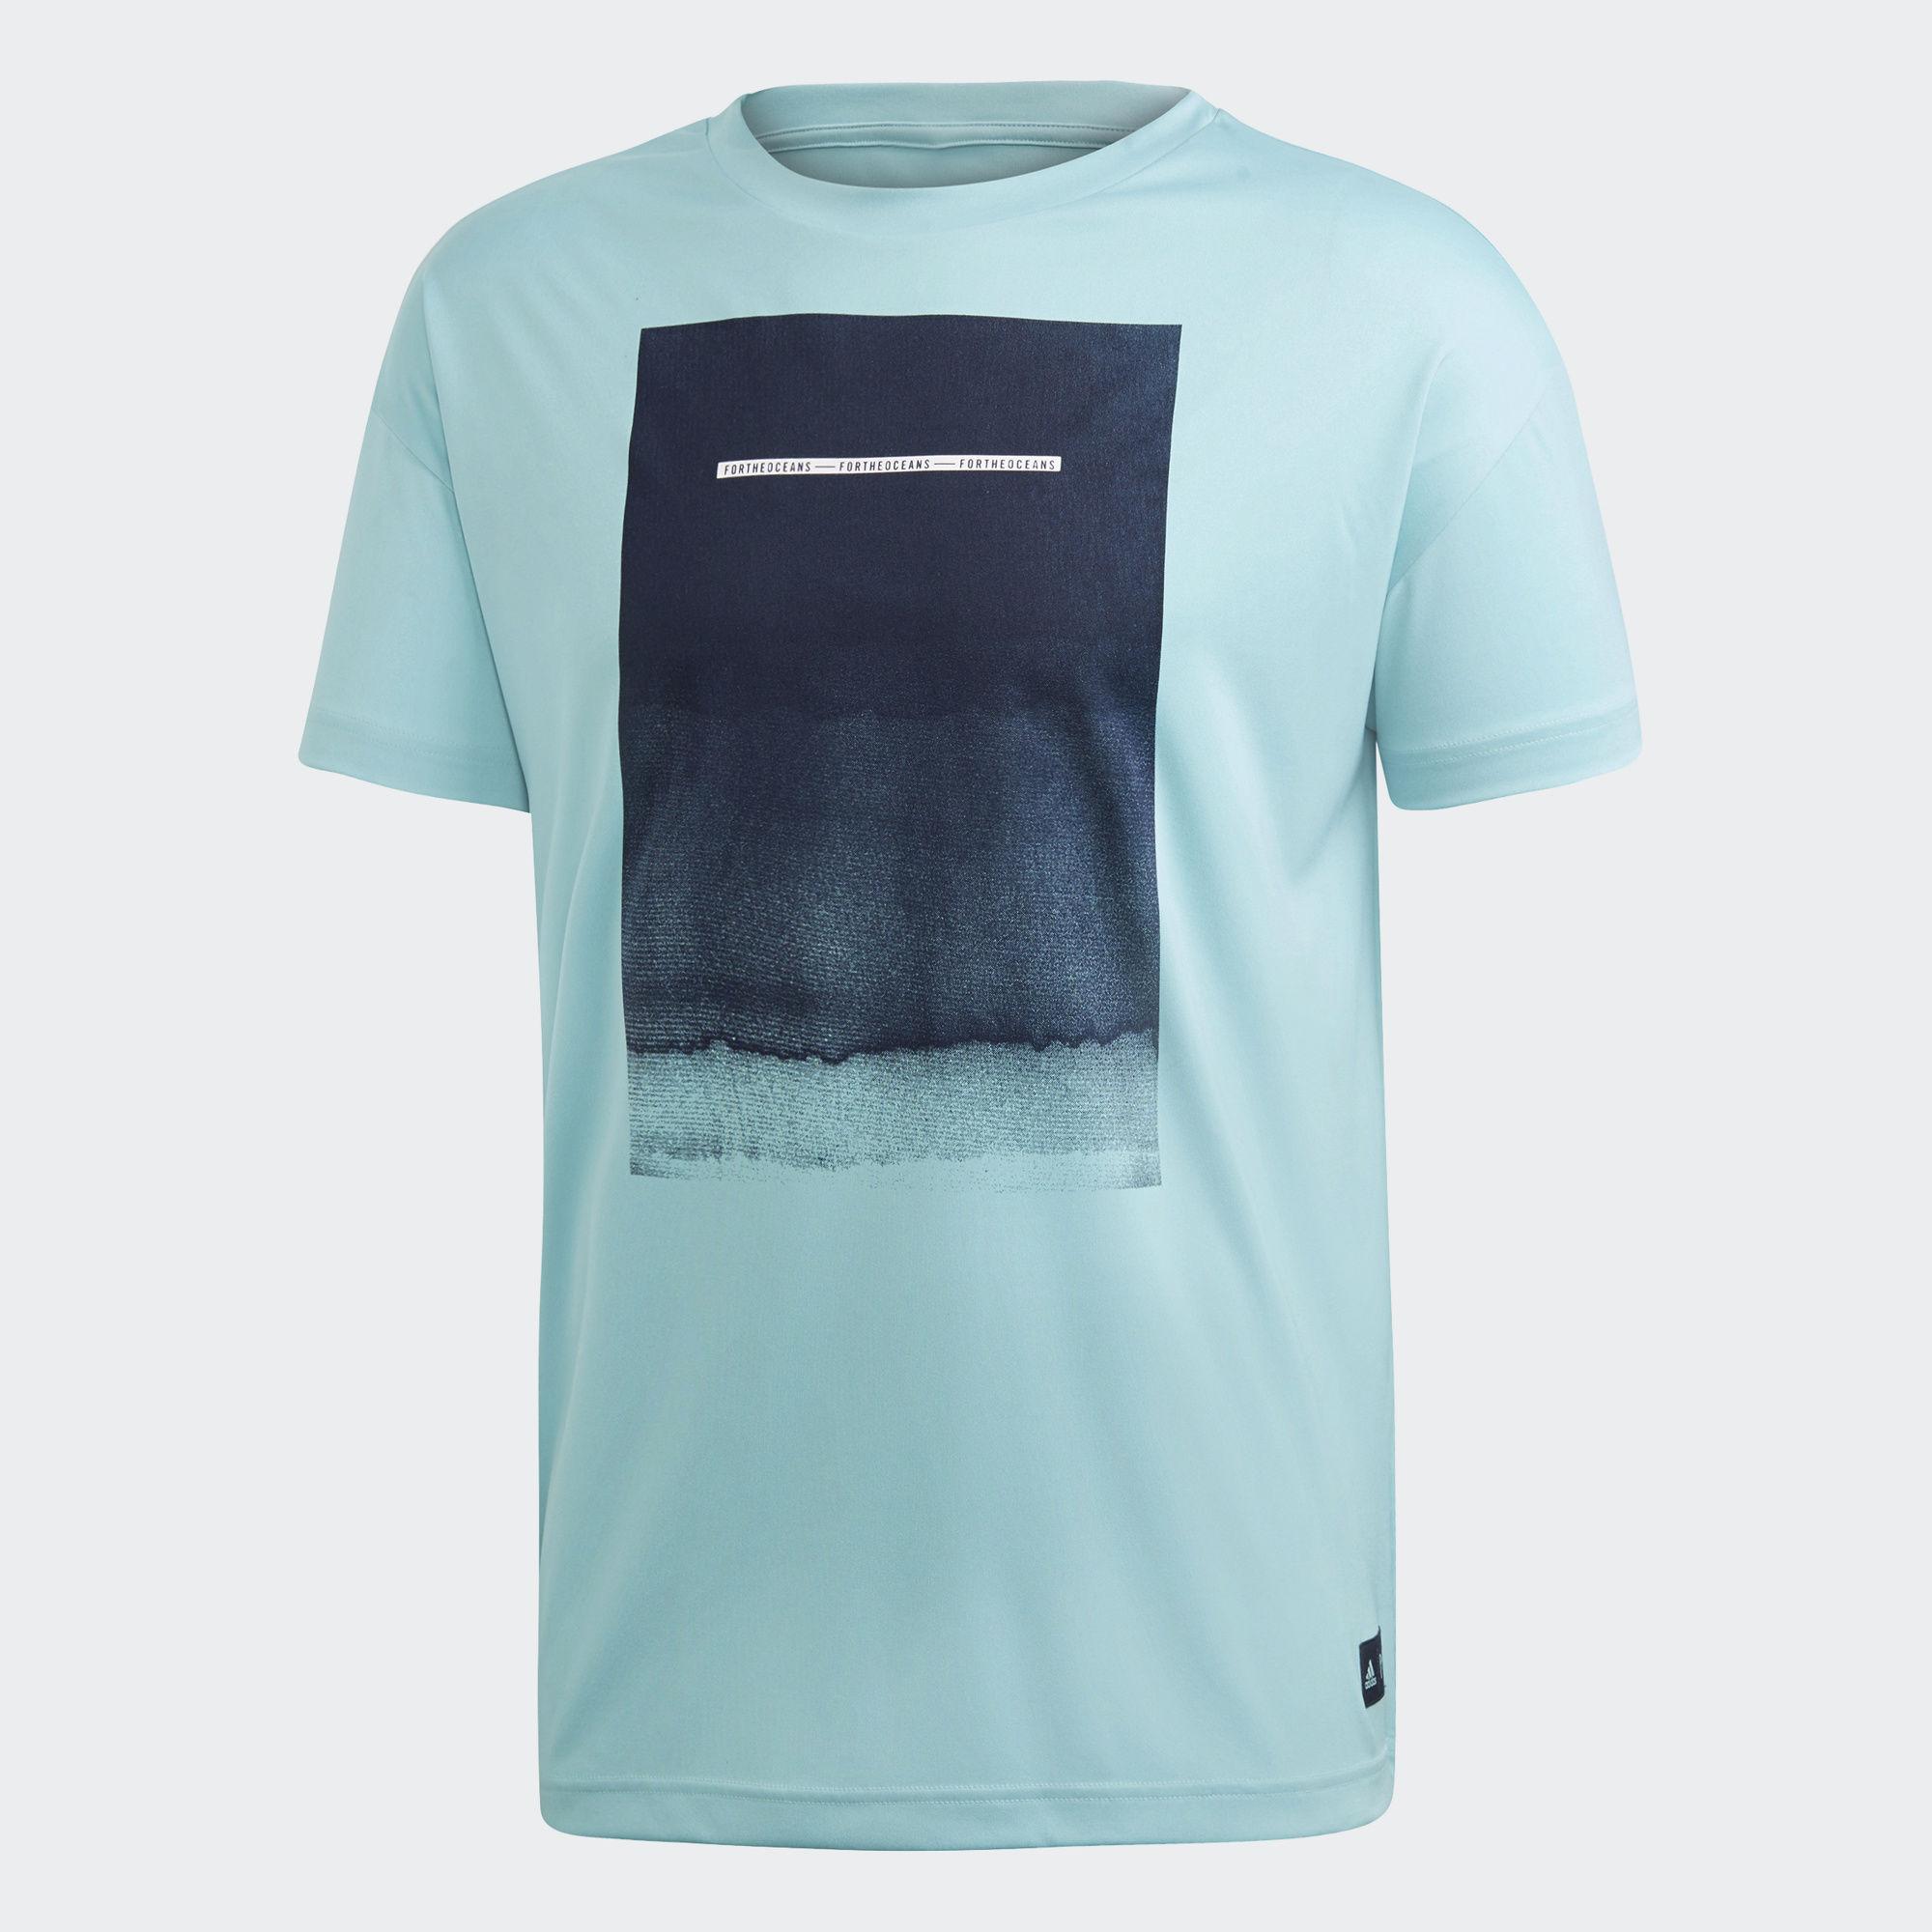 Adidas Mens Parley Graphic Tee - Blue 